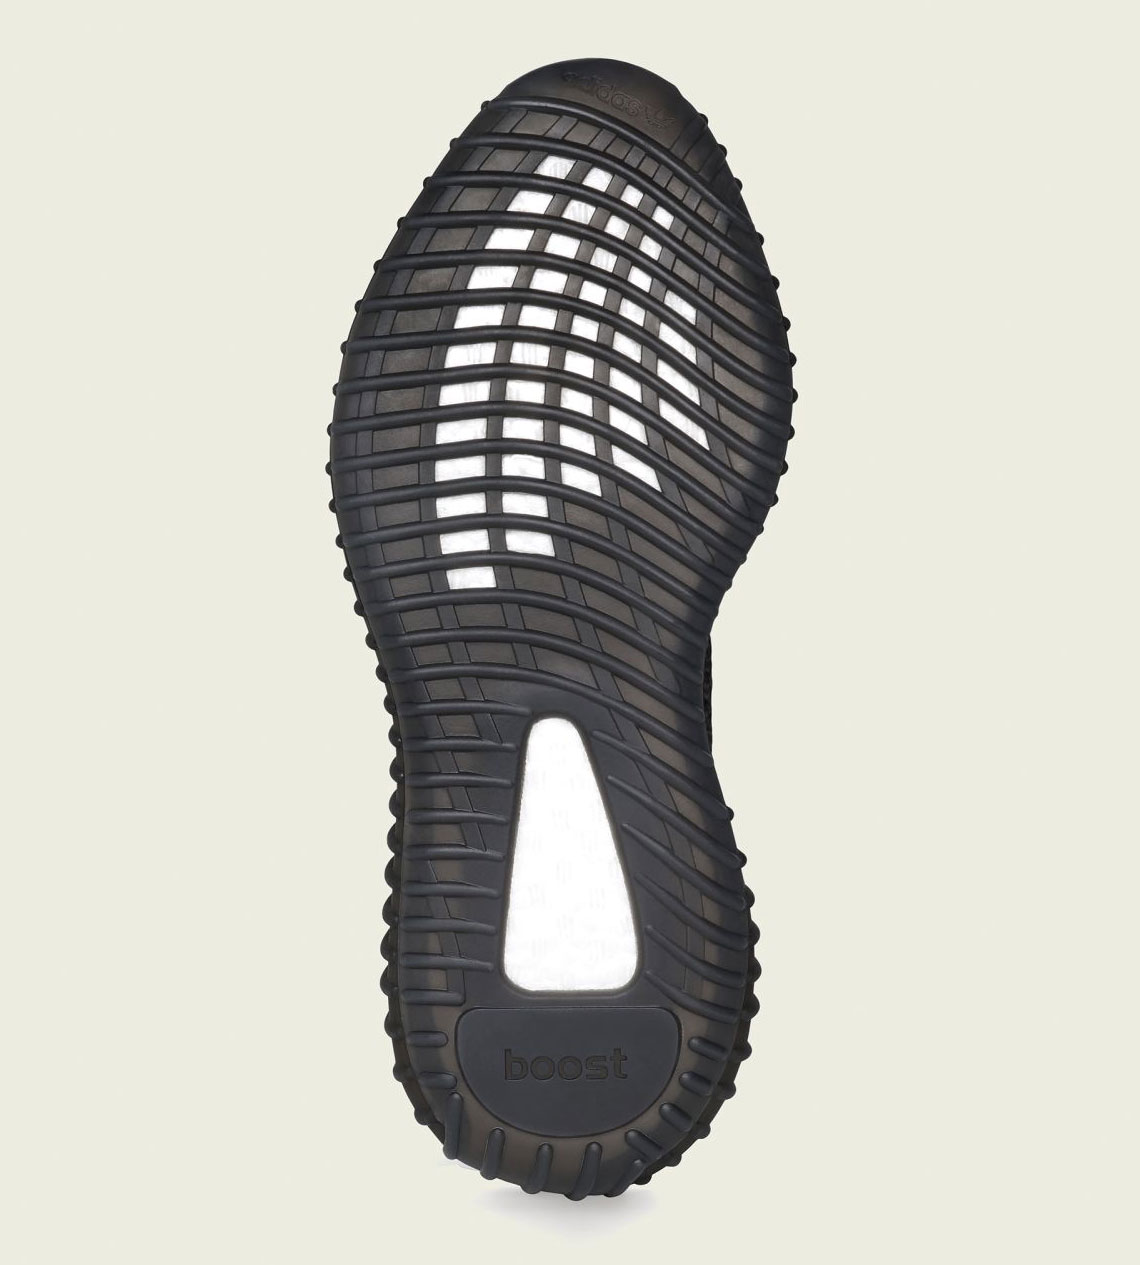 what time does the yeezy 350 v2 black drop